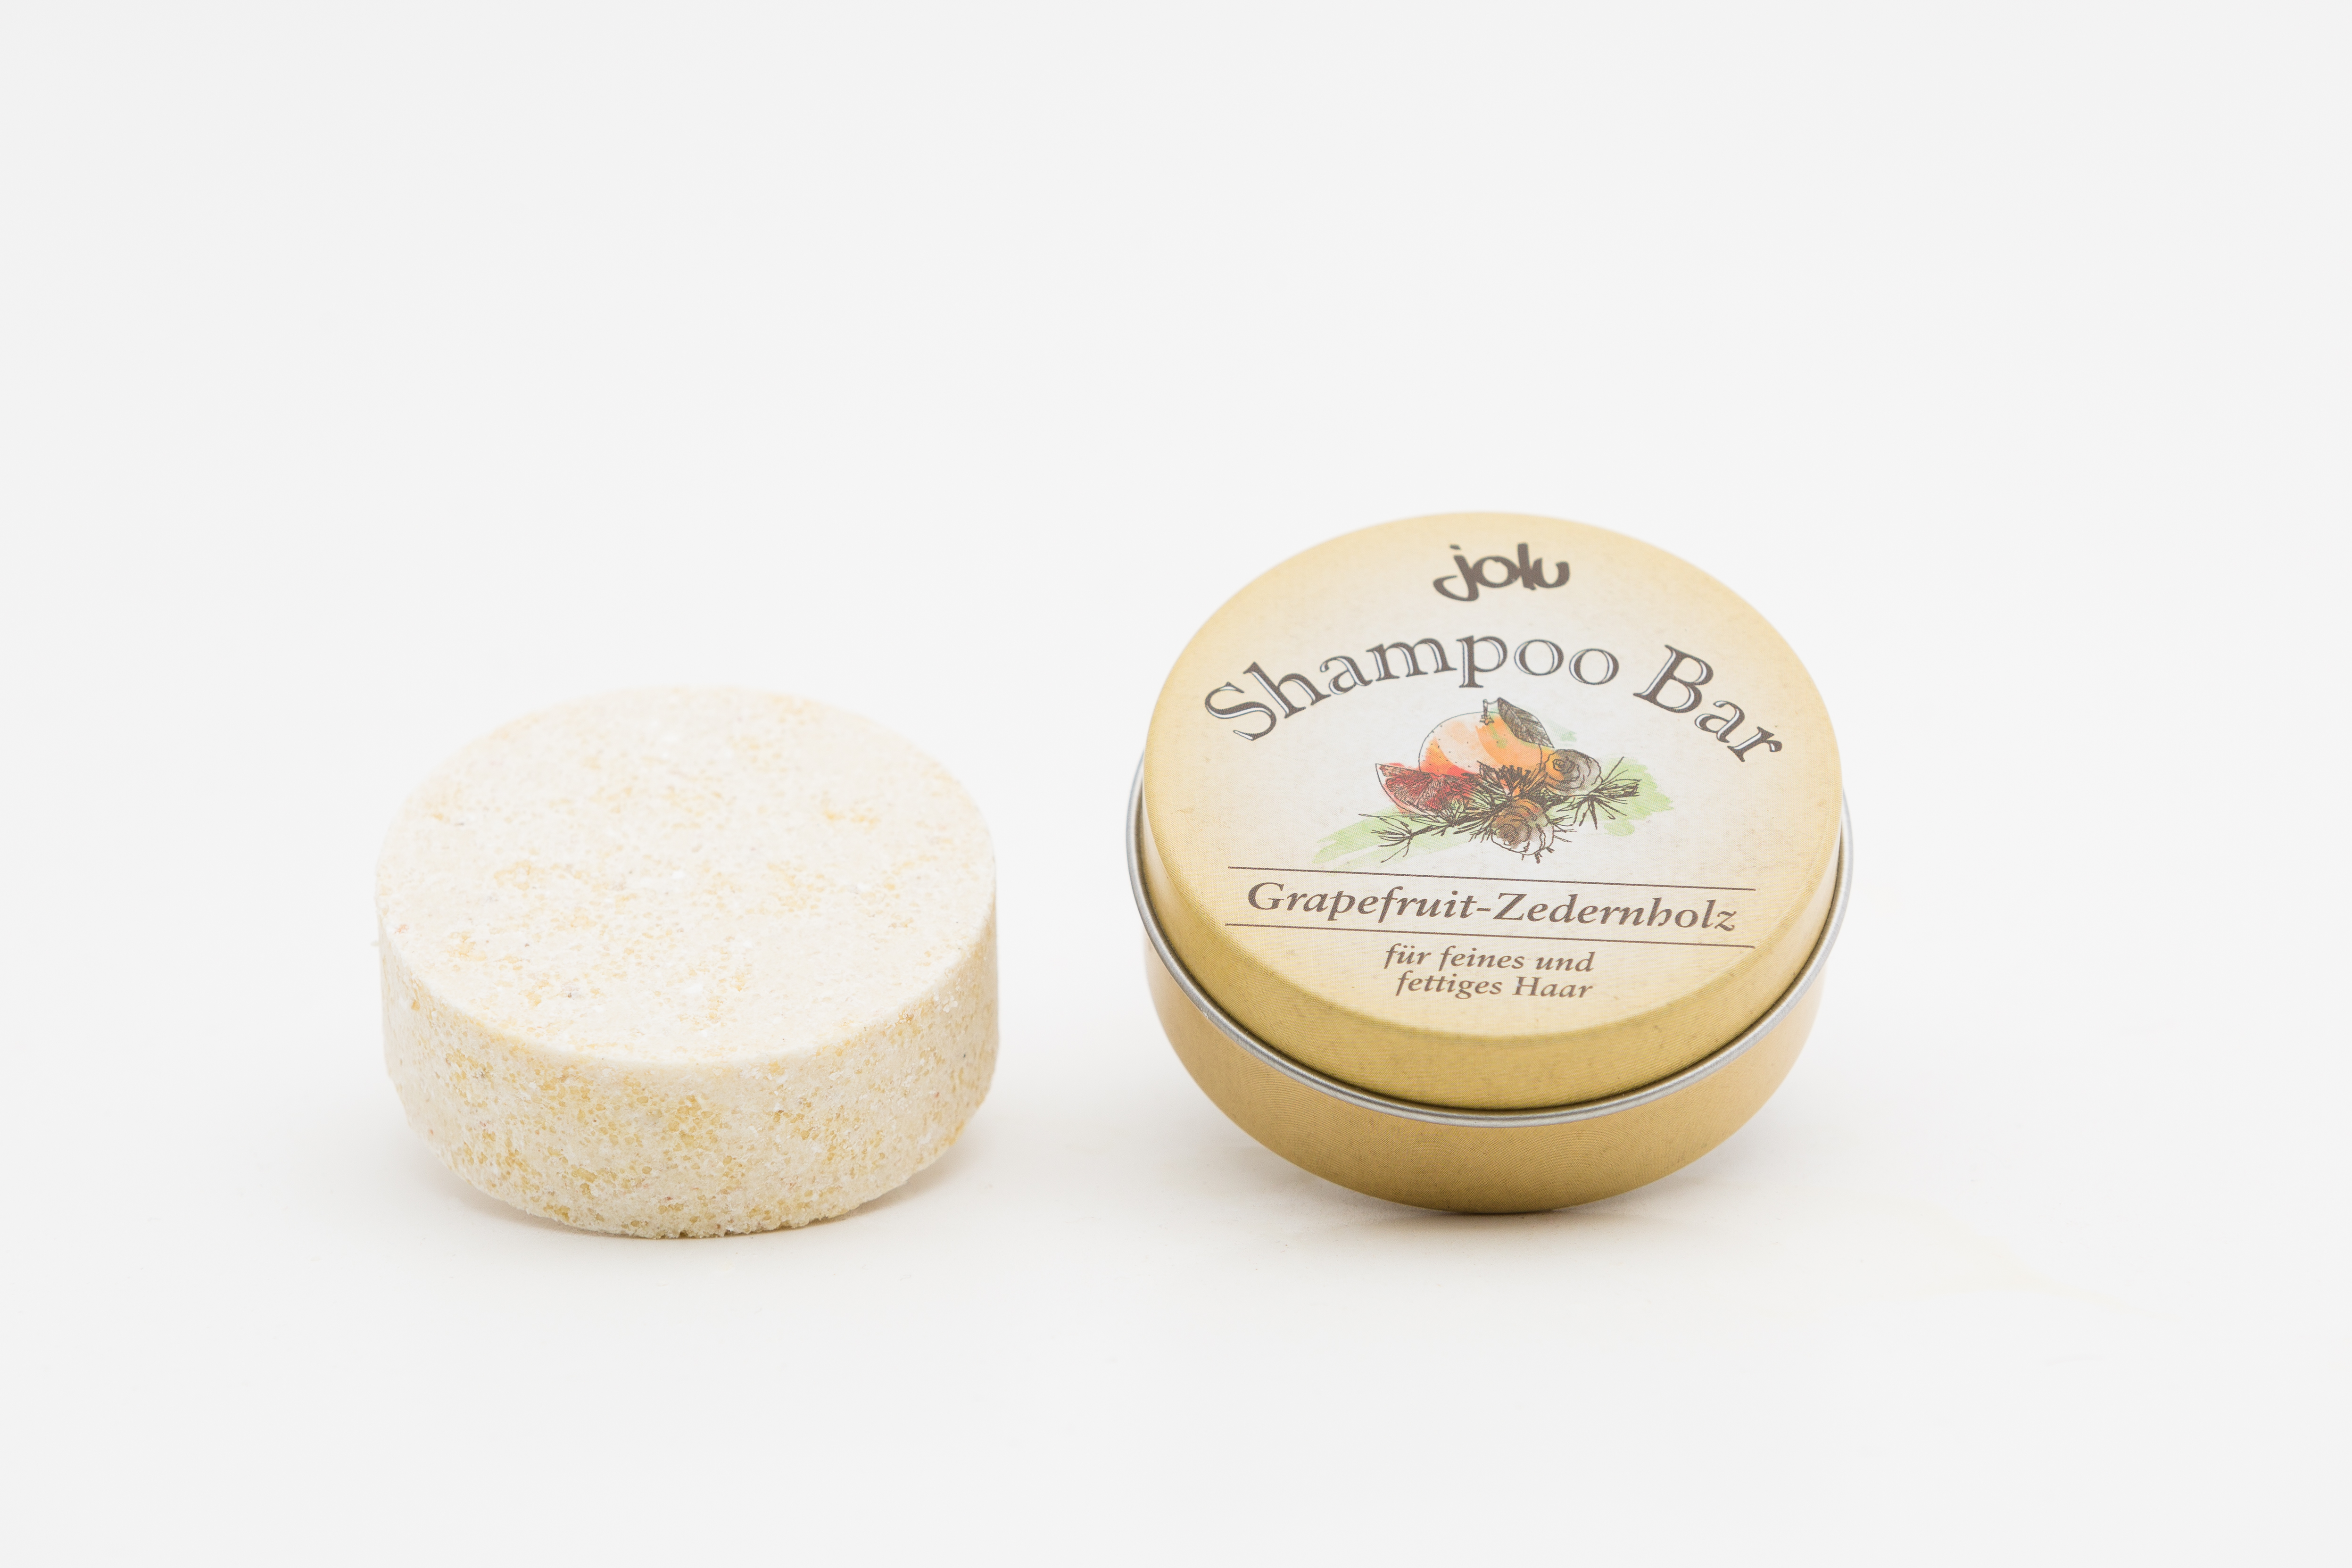 25. Jolu Shampoo Bar: Combination of high-quality actives, conditioner is included